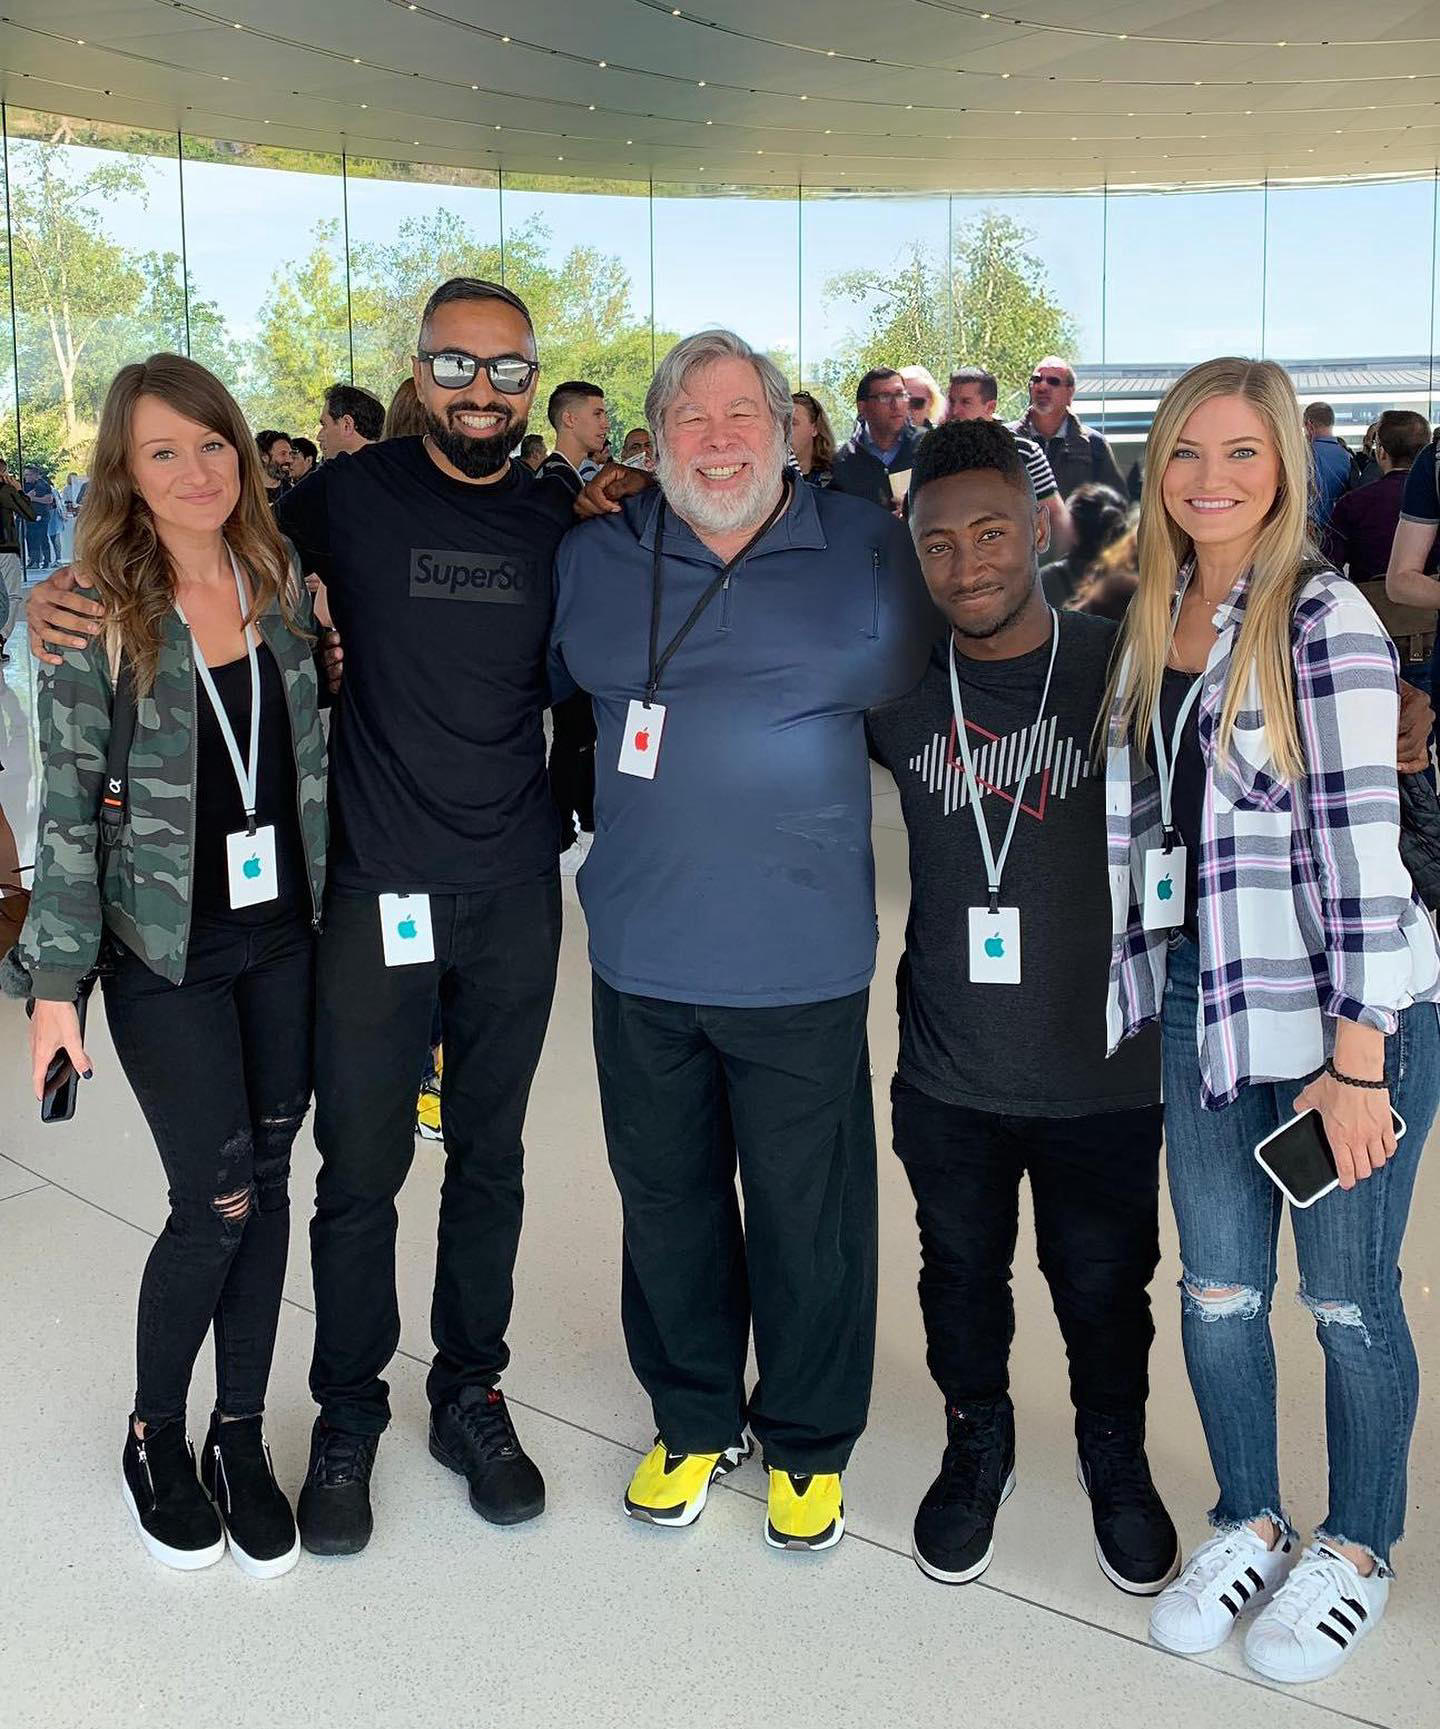 image  1 SuperSaf - Throwback to this day last year with the squad at the #AppleEvent